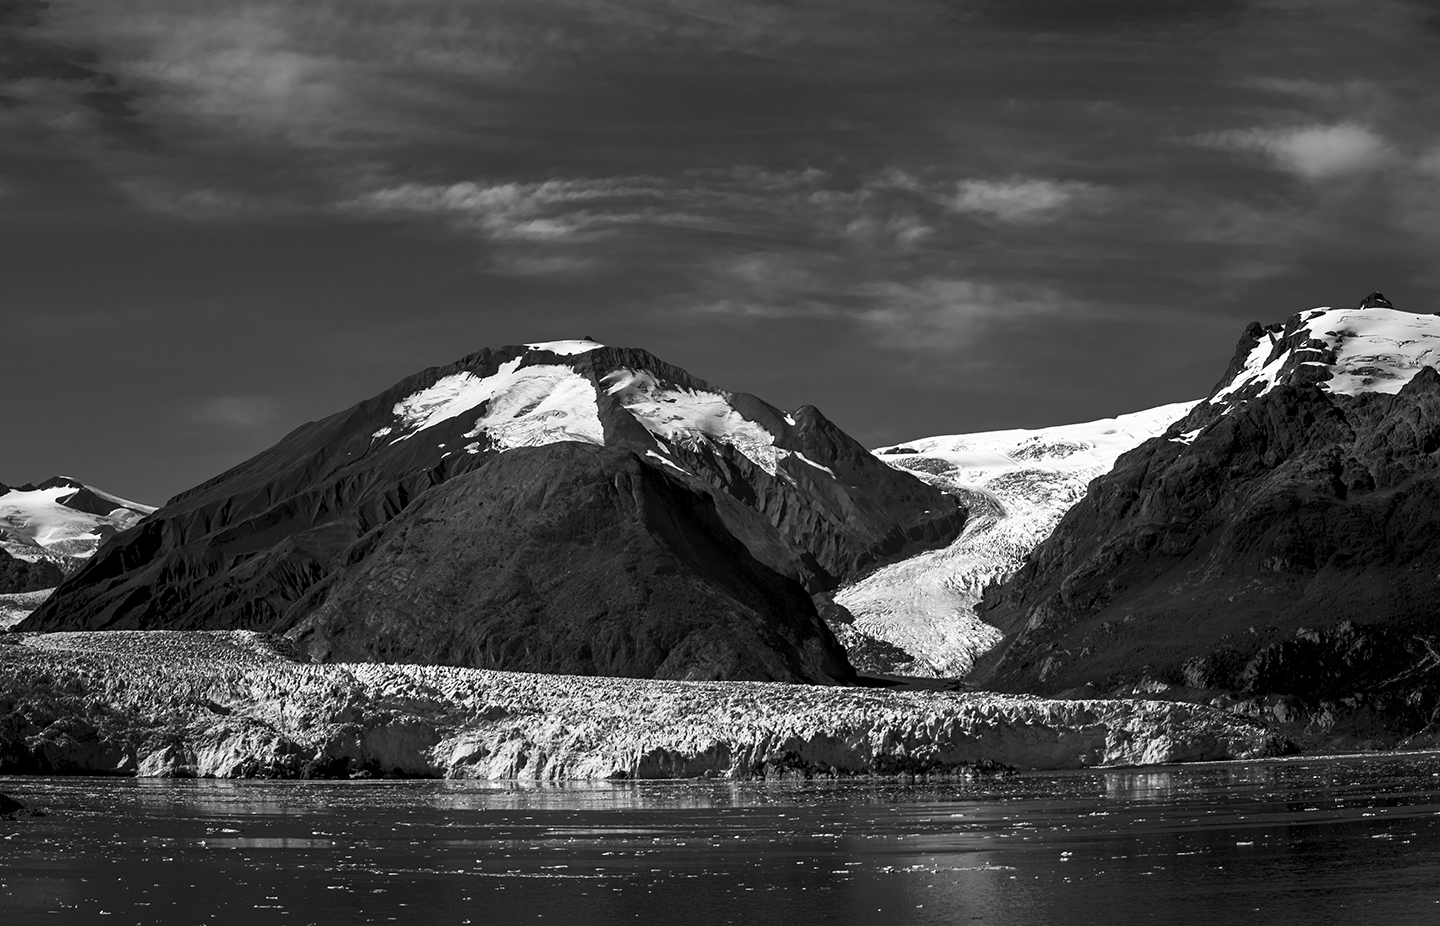 1st PrizeOpen Mono In Class 3 By Paul Hammesfahr For Hanging Glacier AUG-2020.jpg